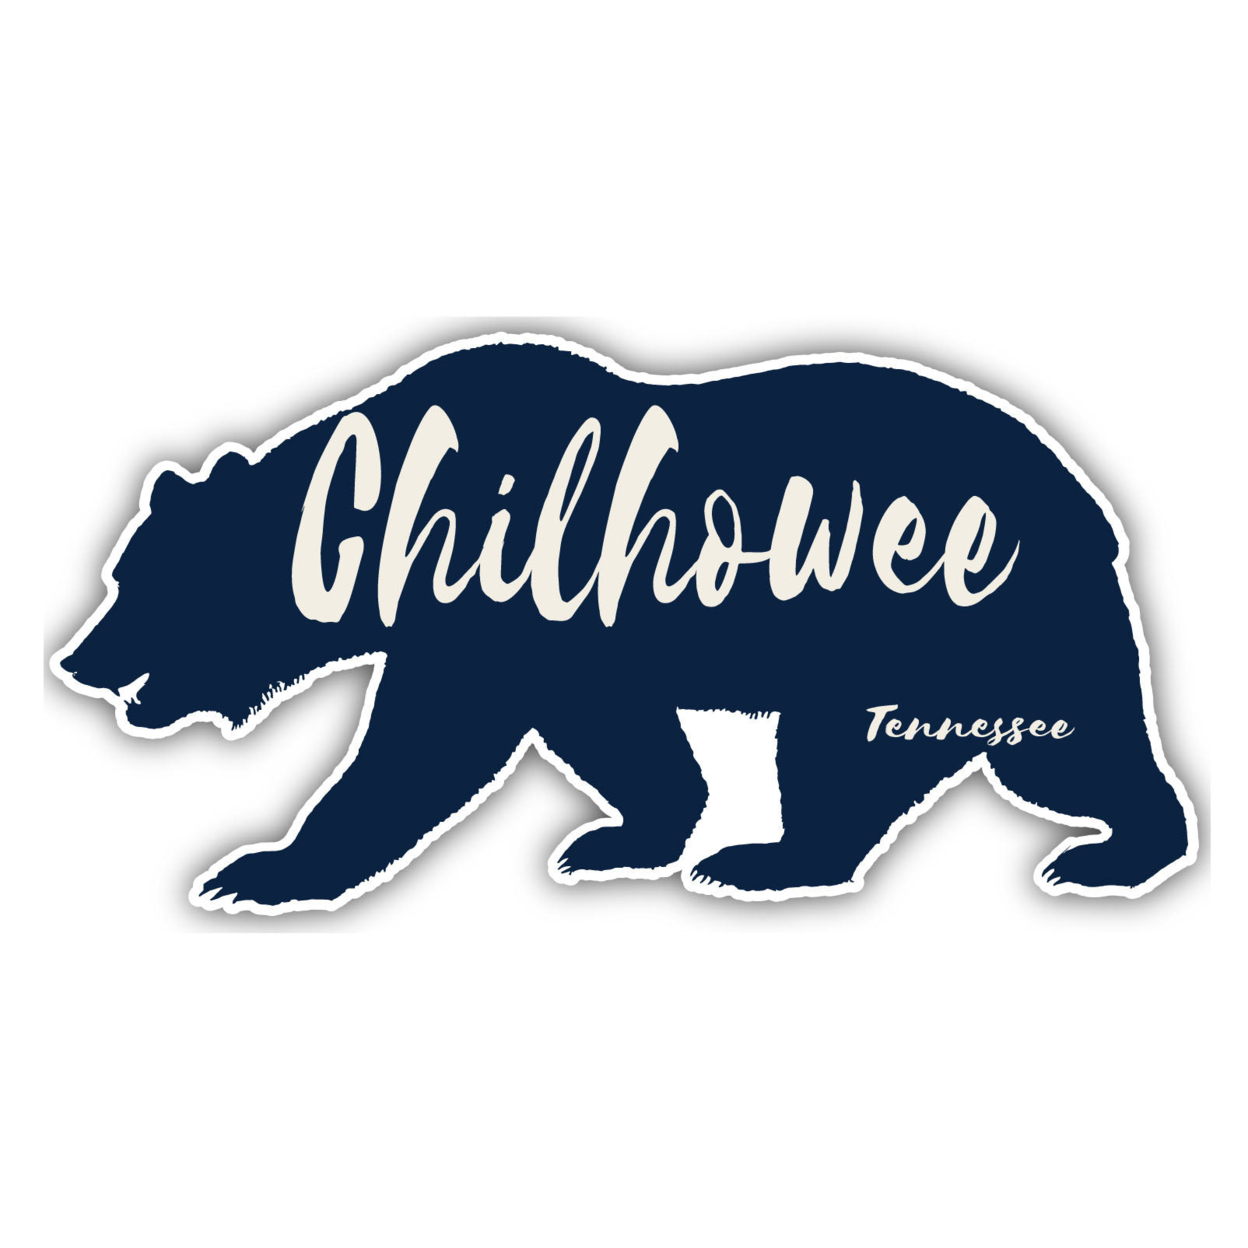 Chilhowee Tennessee Souvenir Decorative Stickers (Choose Theme And Size) - Single Unit, 10-Inch, Bear